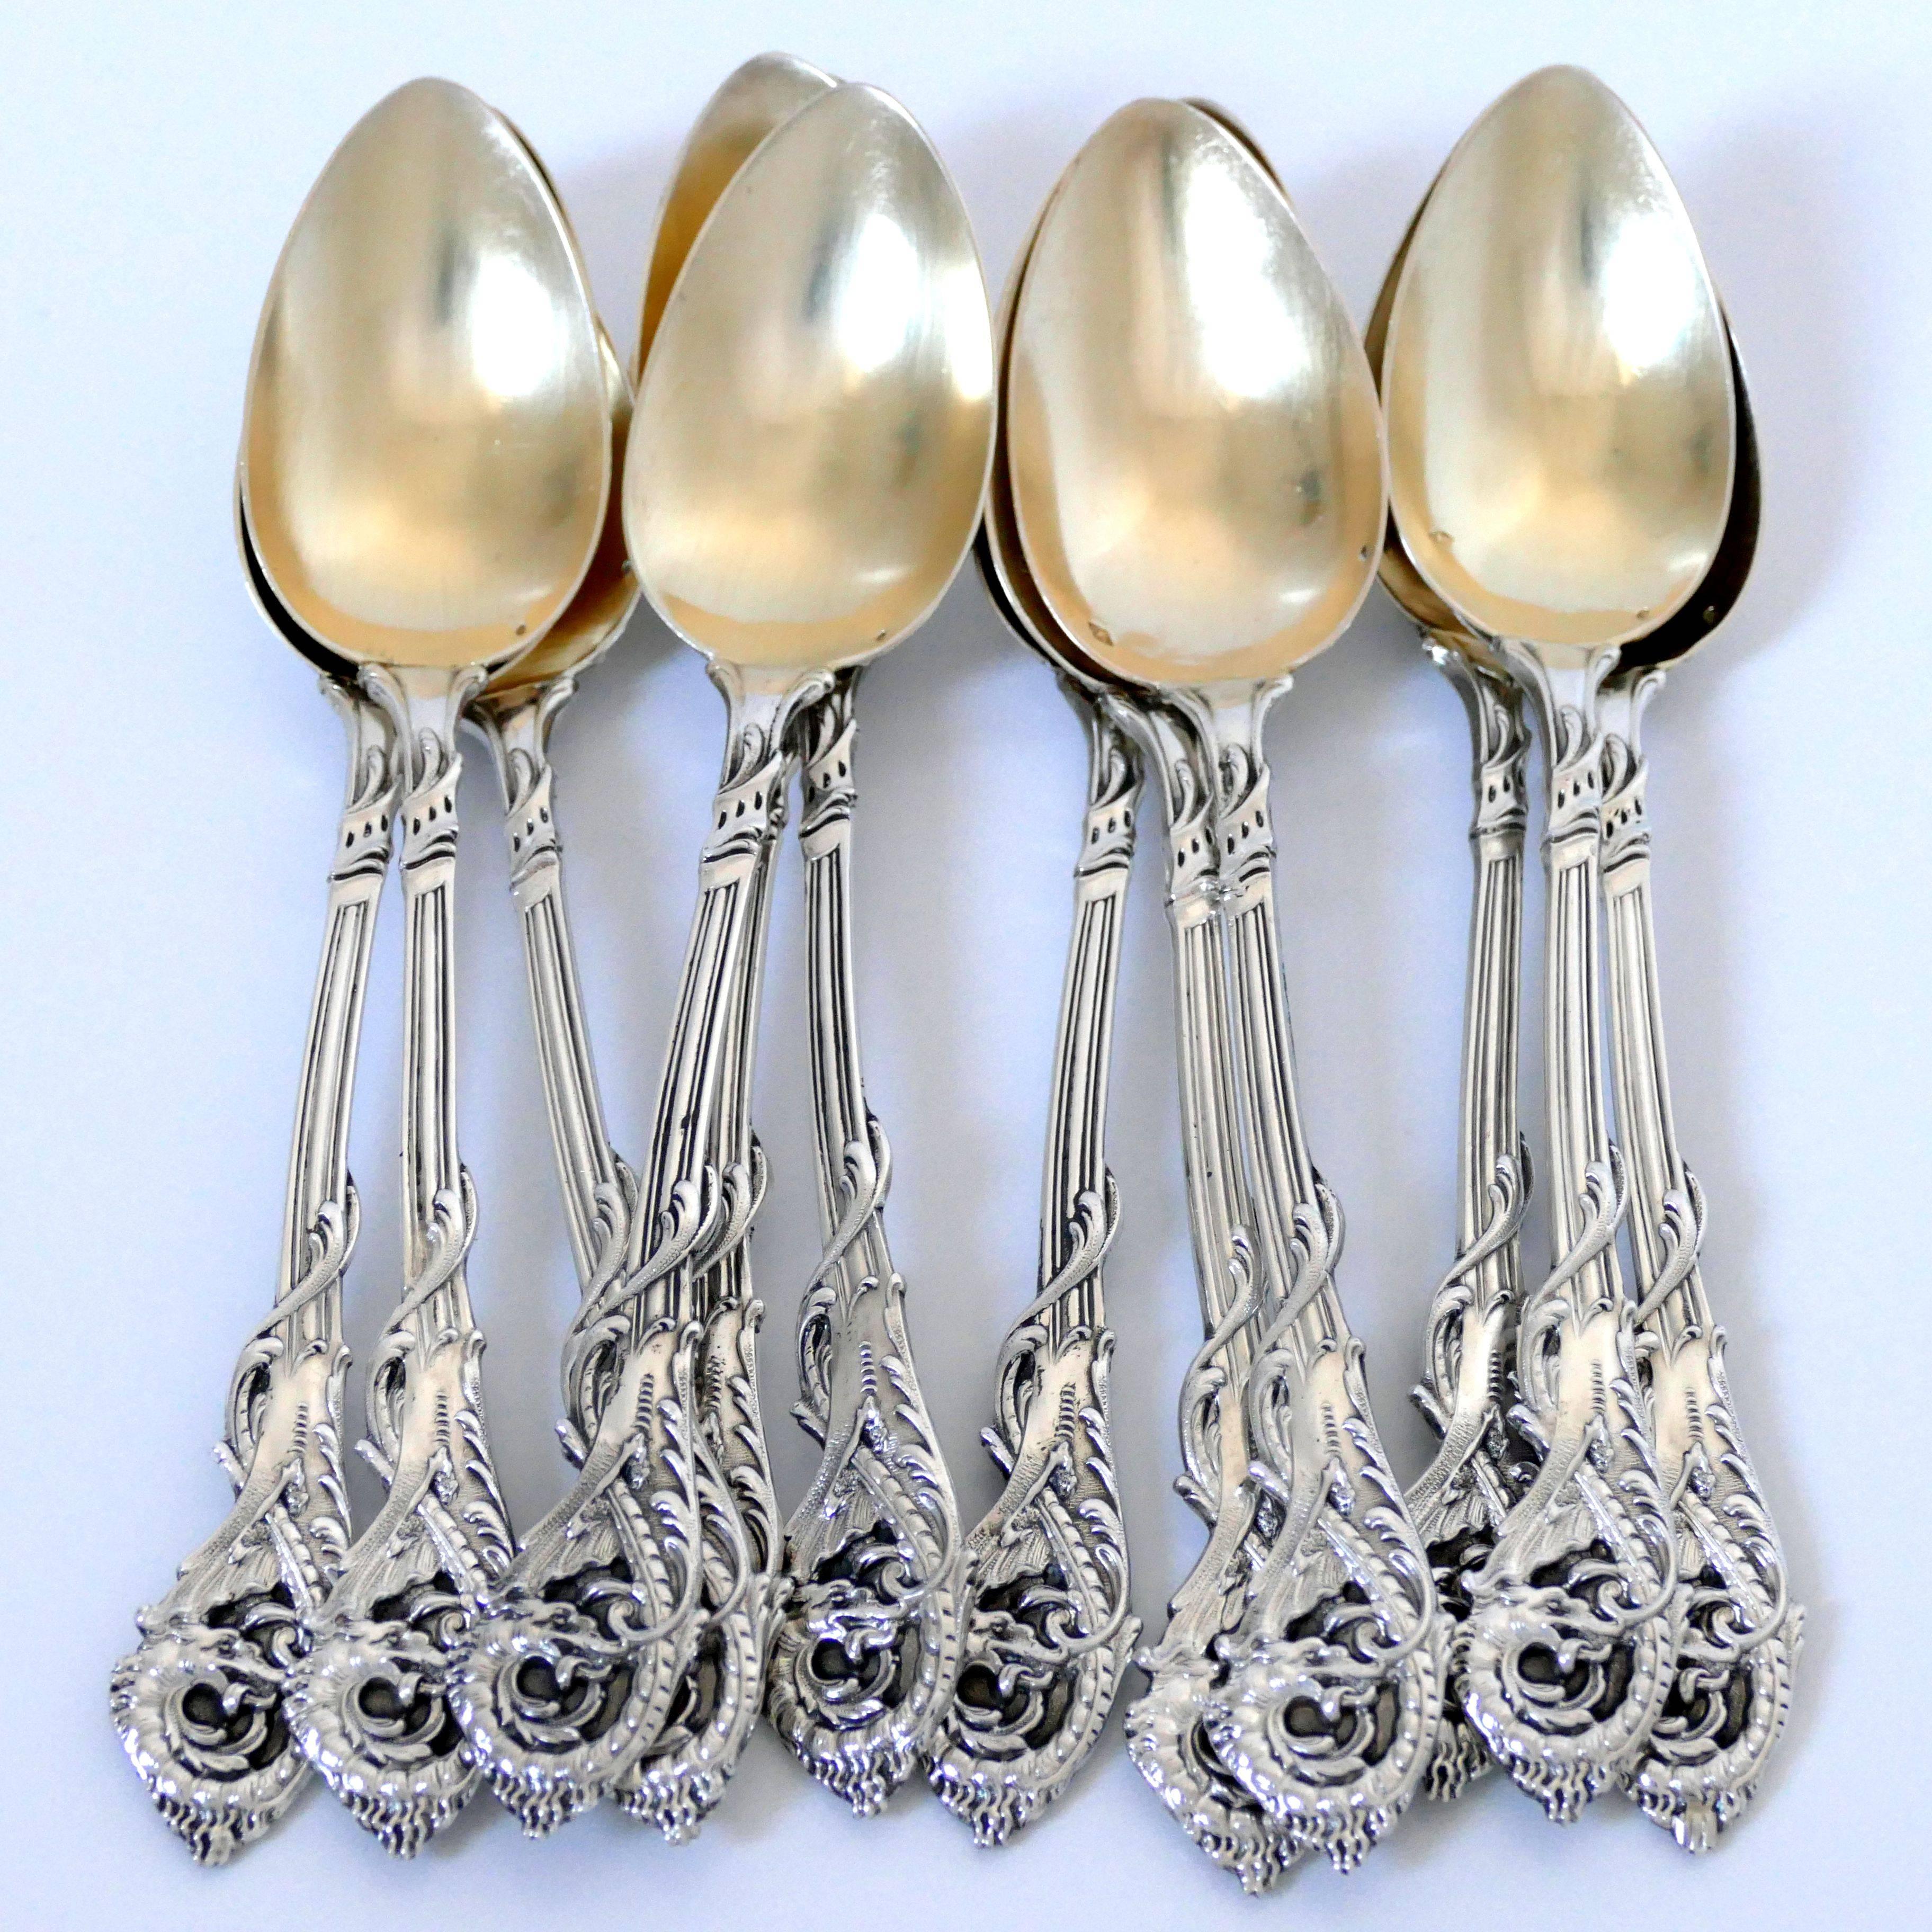 Veyrat Rare French Sterling Silver 18k Gold Tea Coffee Spoons Set 12 Pc, Dragon For Sale 3